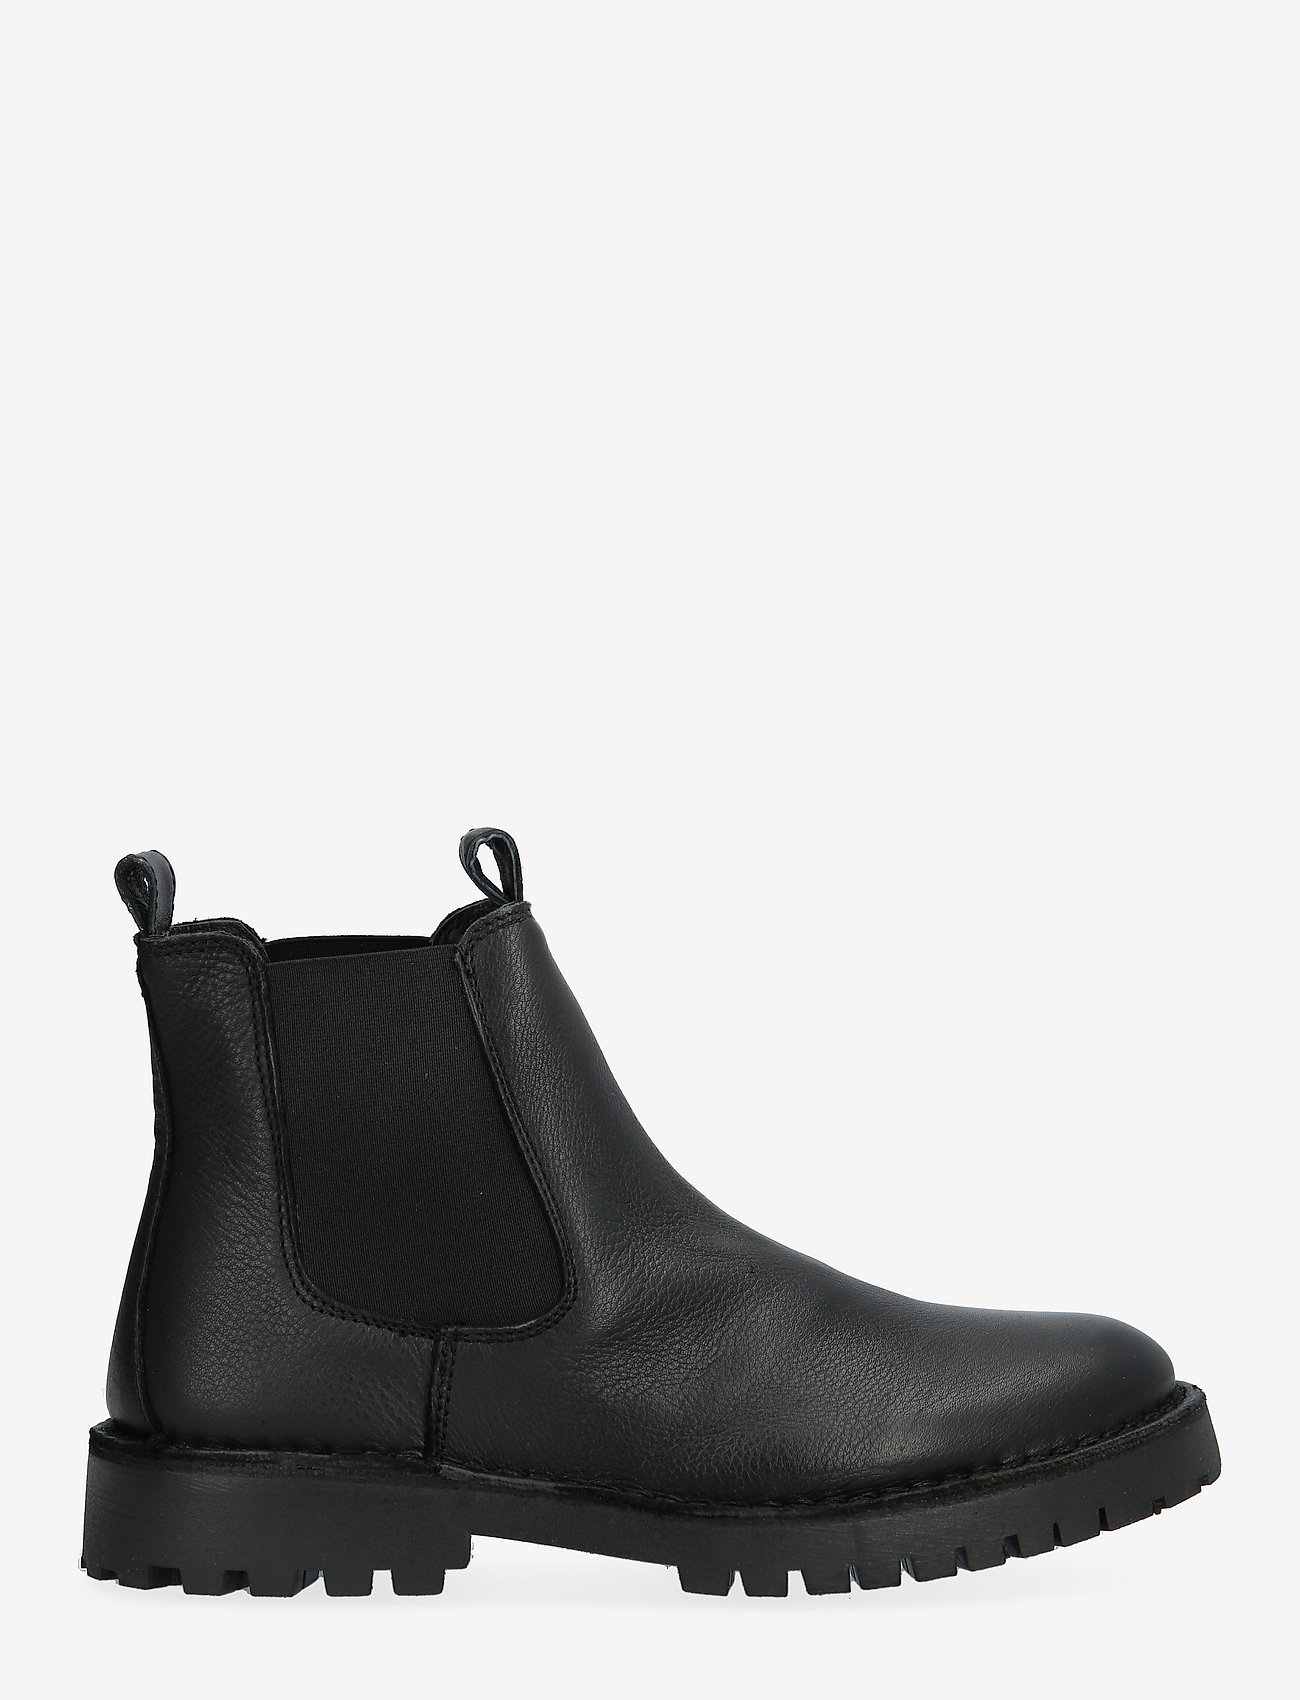 Selected Homme - SLHRICKY LEATHER CHELSEA BOOT B - birthday gifts - black - 1